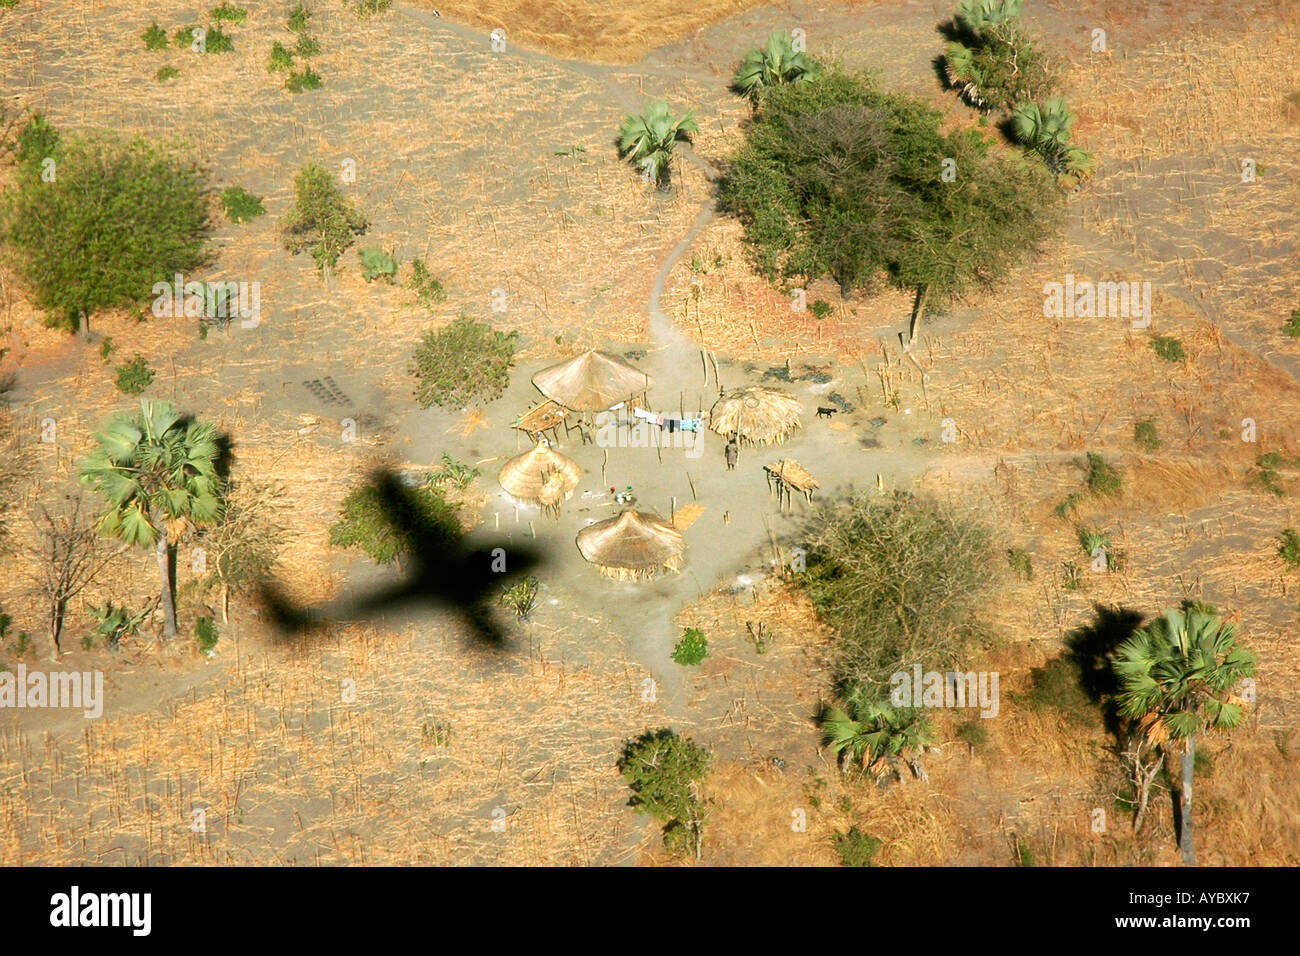 A plane casts its shadow over the inhabited traditional huts in South Sudan Stock Photo